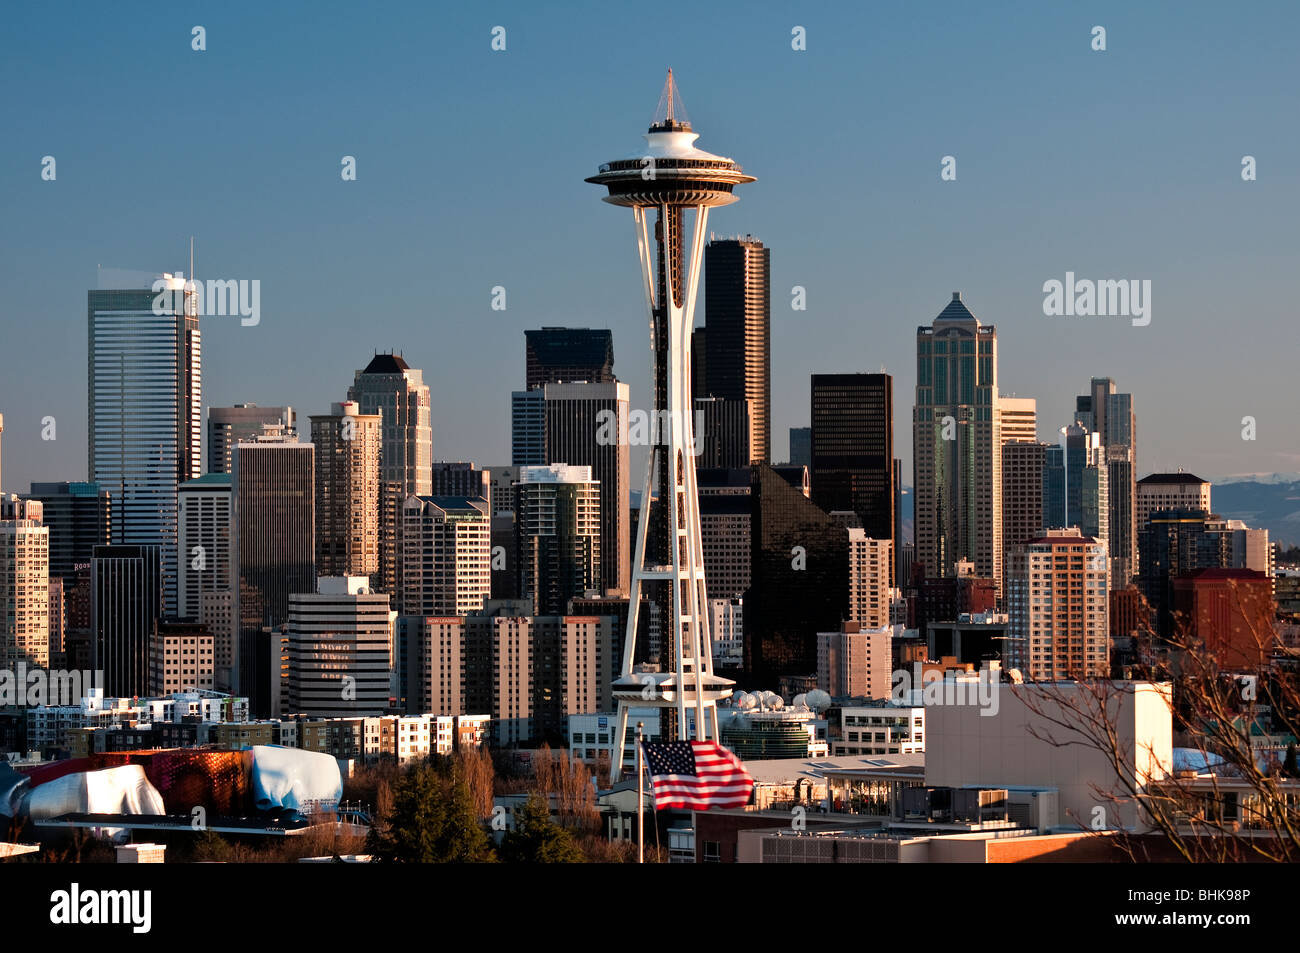 Downtown skyline with the Space Needle tower, Seattle, Washington, USA Stock Photo